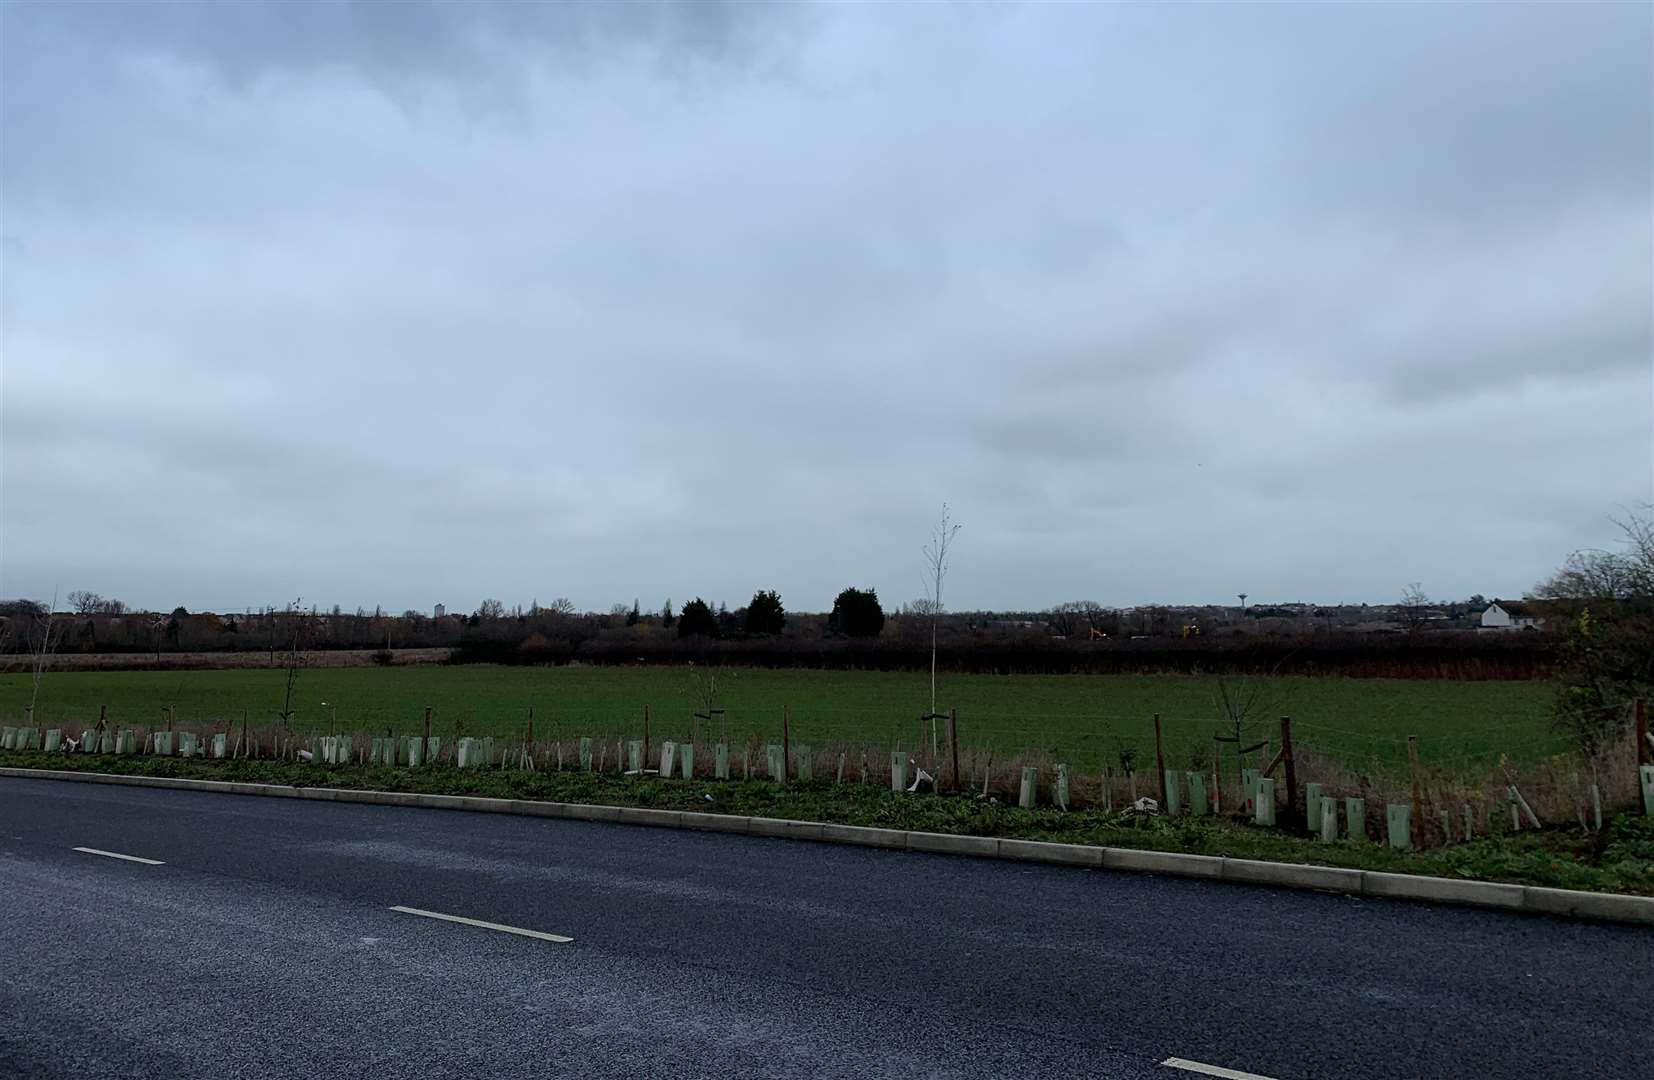 160 homes are going to be built on farmland near Ashley Walters’ home